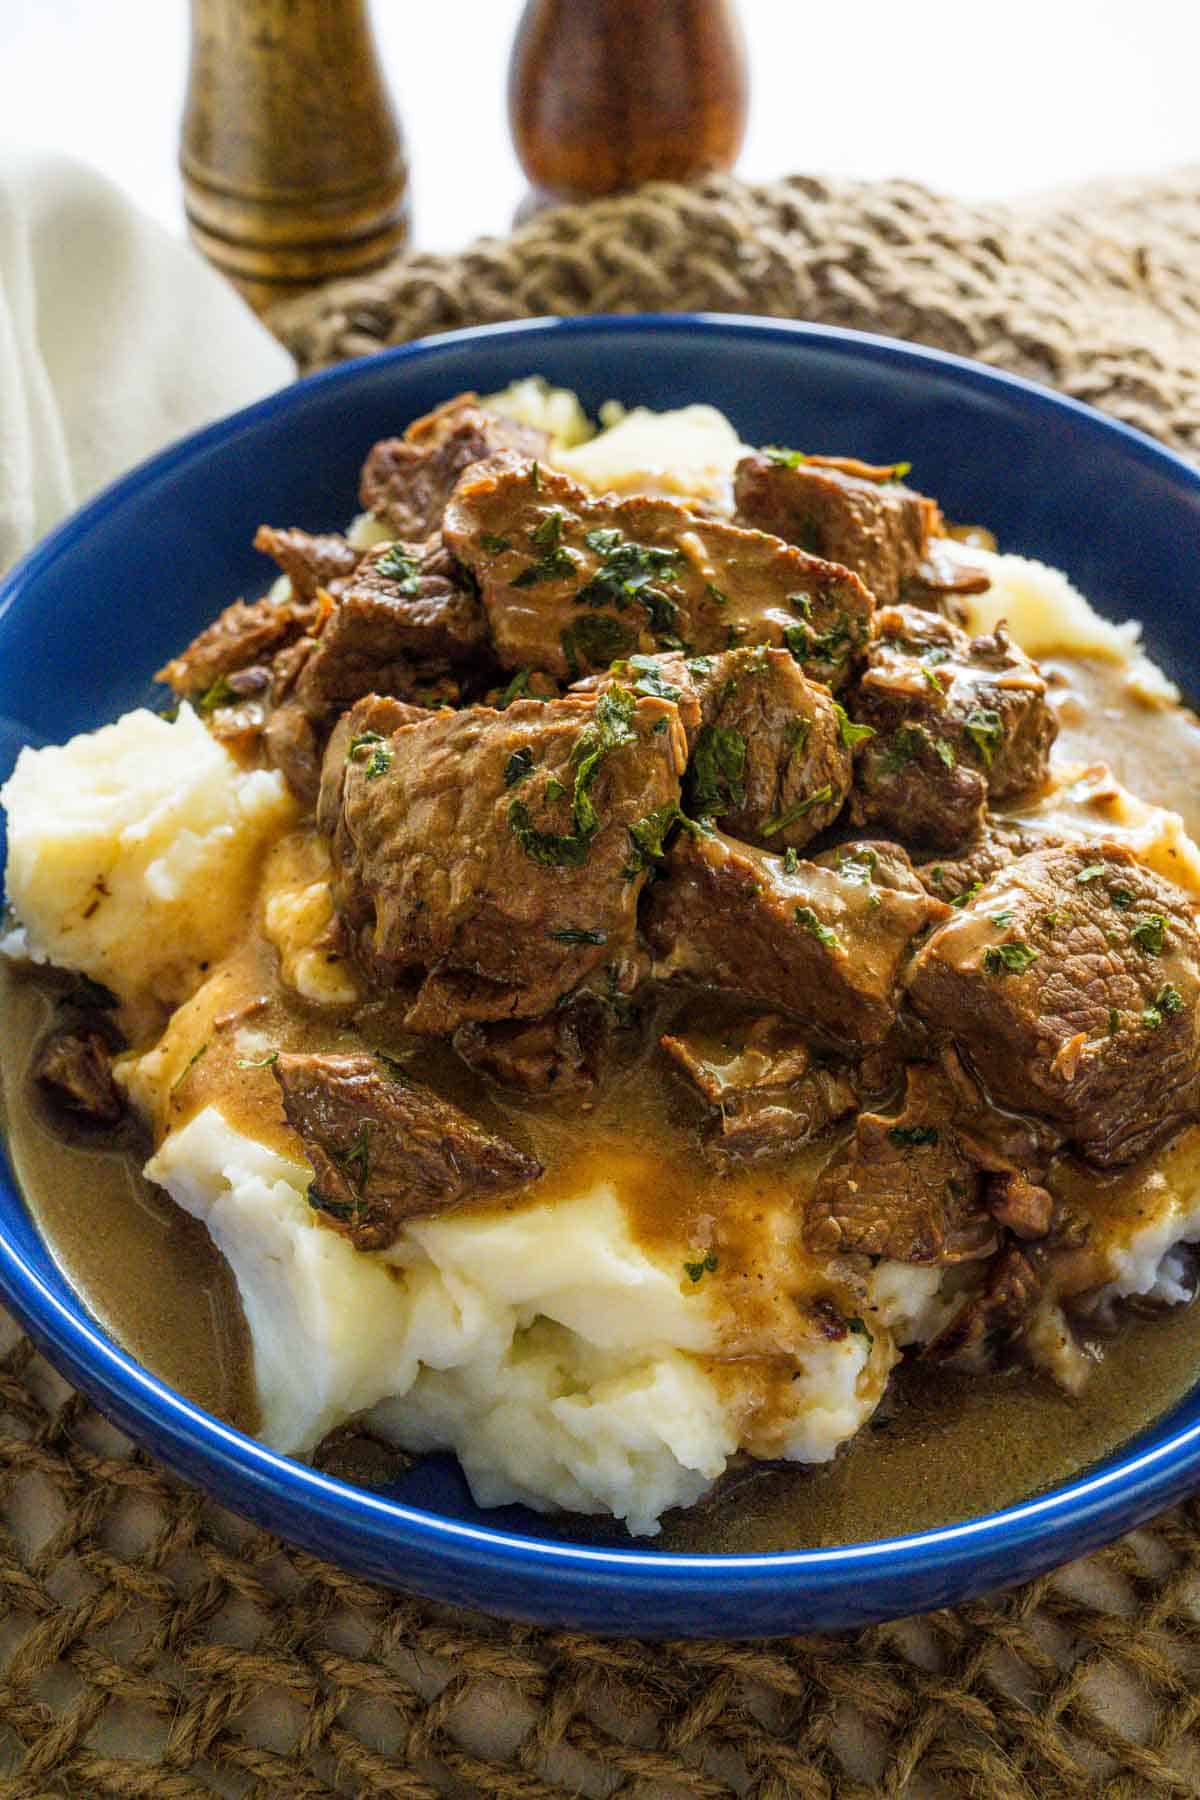 A bowl full of mashed potatoes topped with beef tips and gravy.